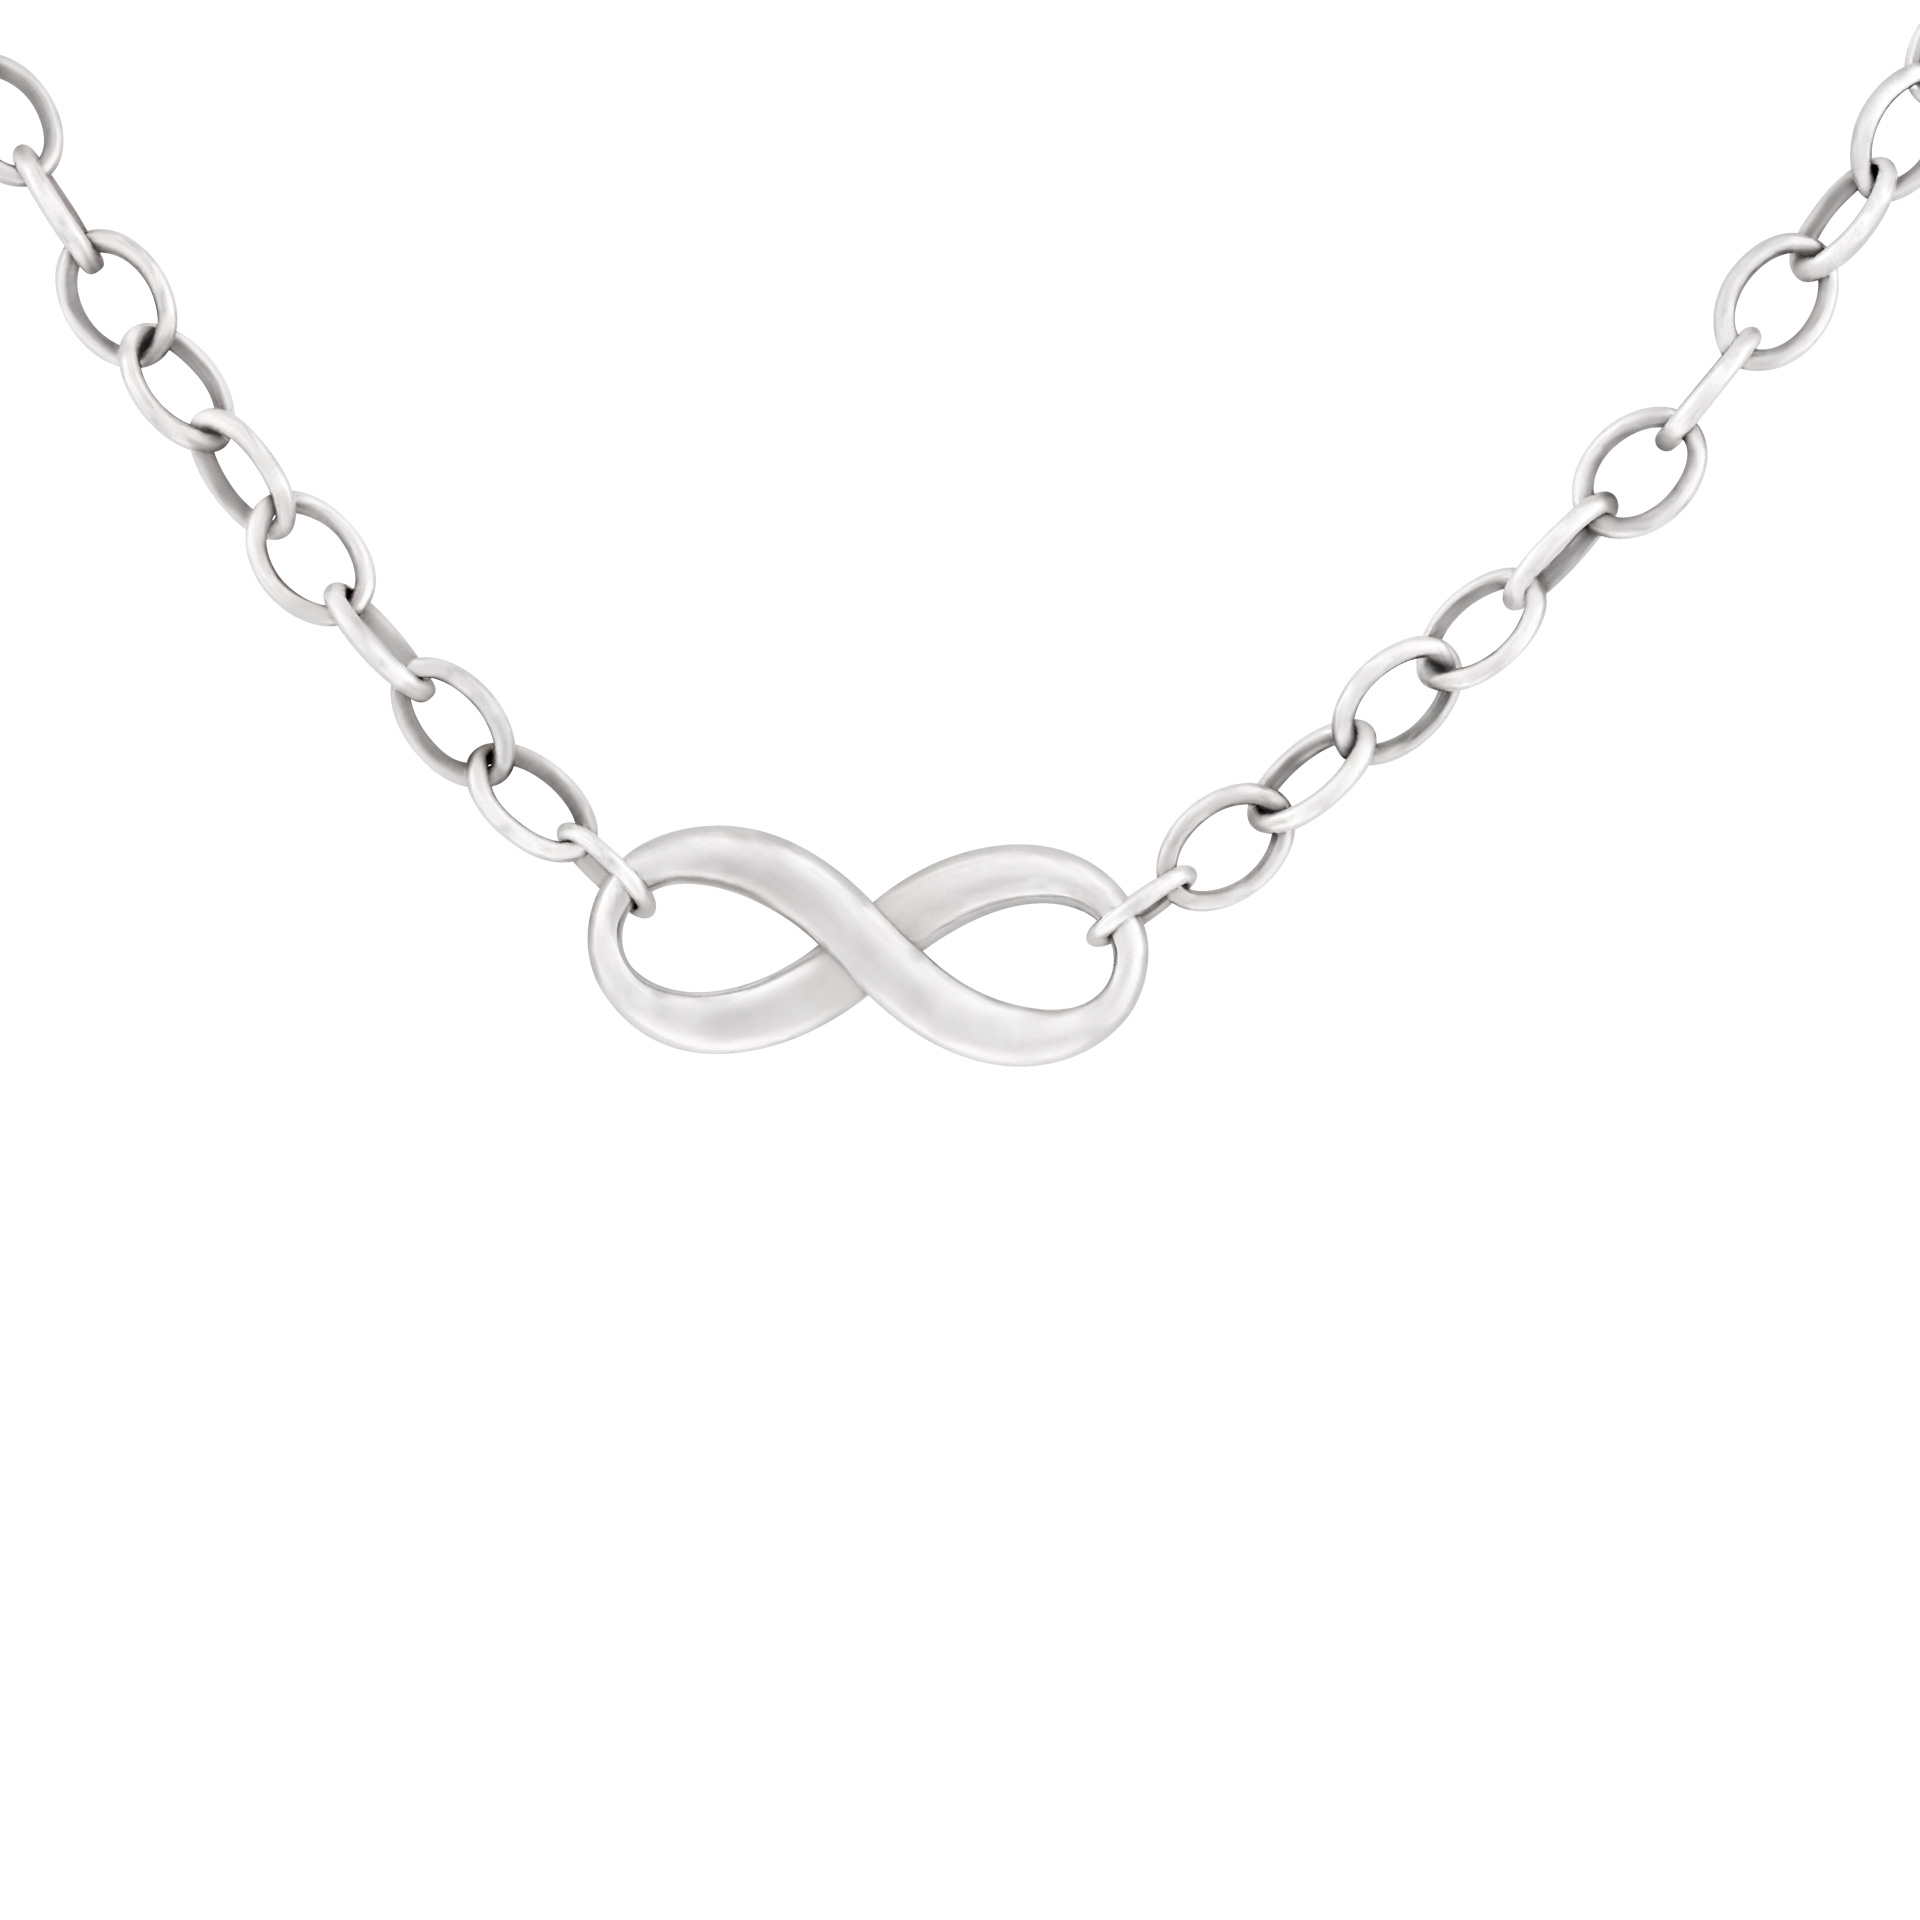 Tiffany & co Infinity pendant and chain in sterling silver. image 1